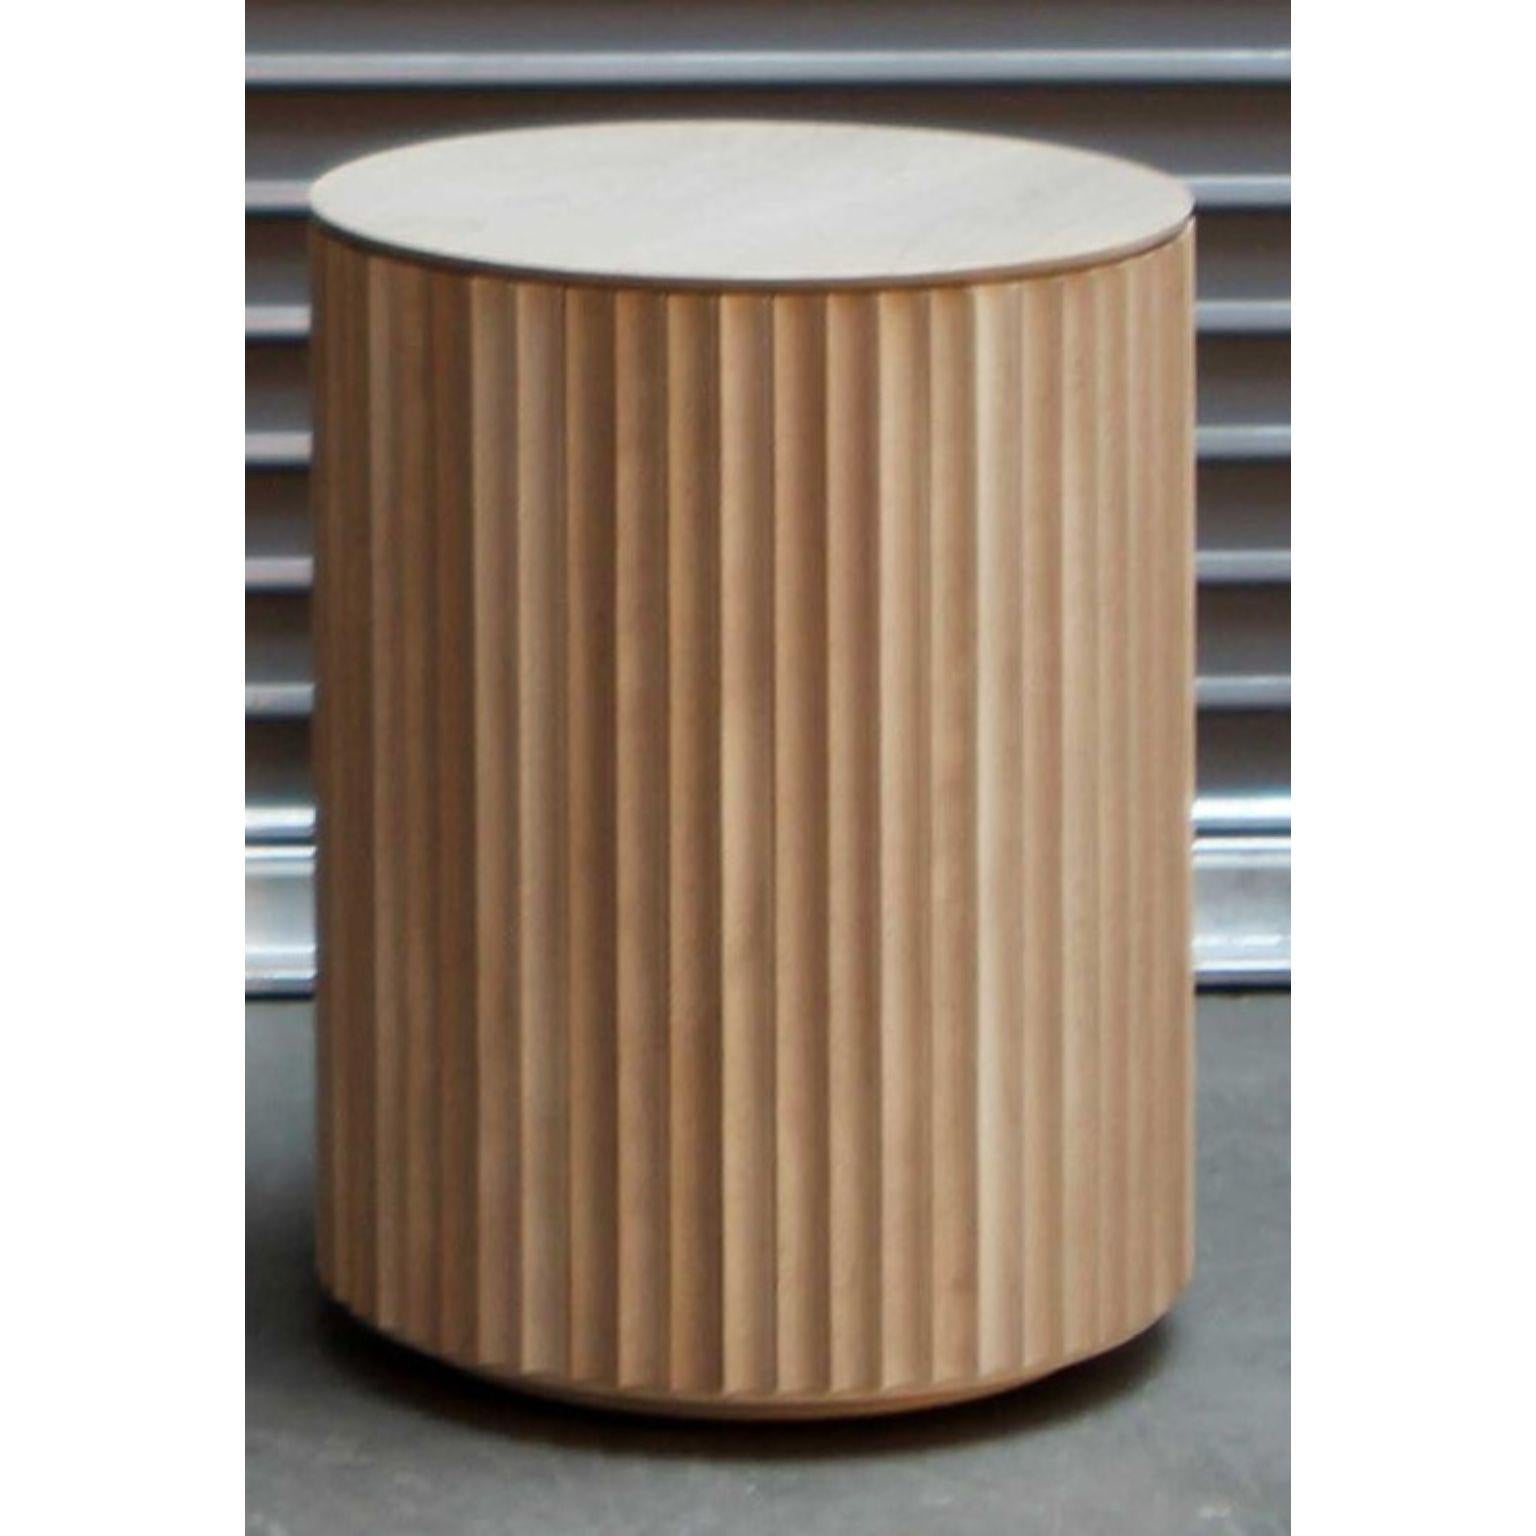 Pilar end table by Indo Made
One of a kind.
Dimensions: Ø40.6 X H53.3 cm 
Materials: Maple.
Finish: Natural.

Also available in other materials and finishes. Please contact us.
Each piece is carefully handcrafted by our team using natural materials